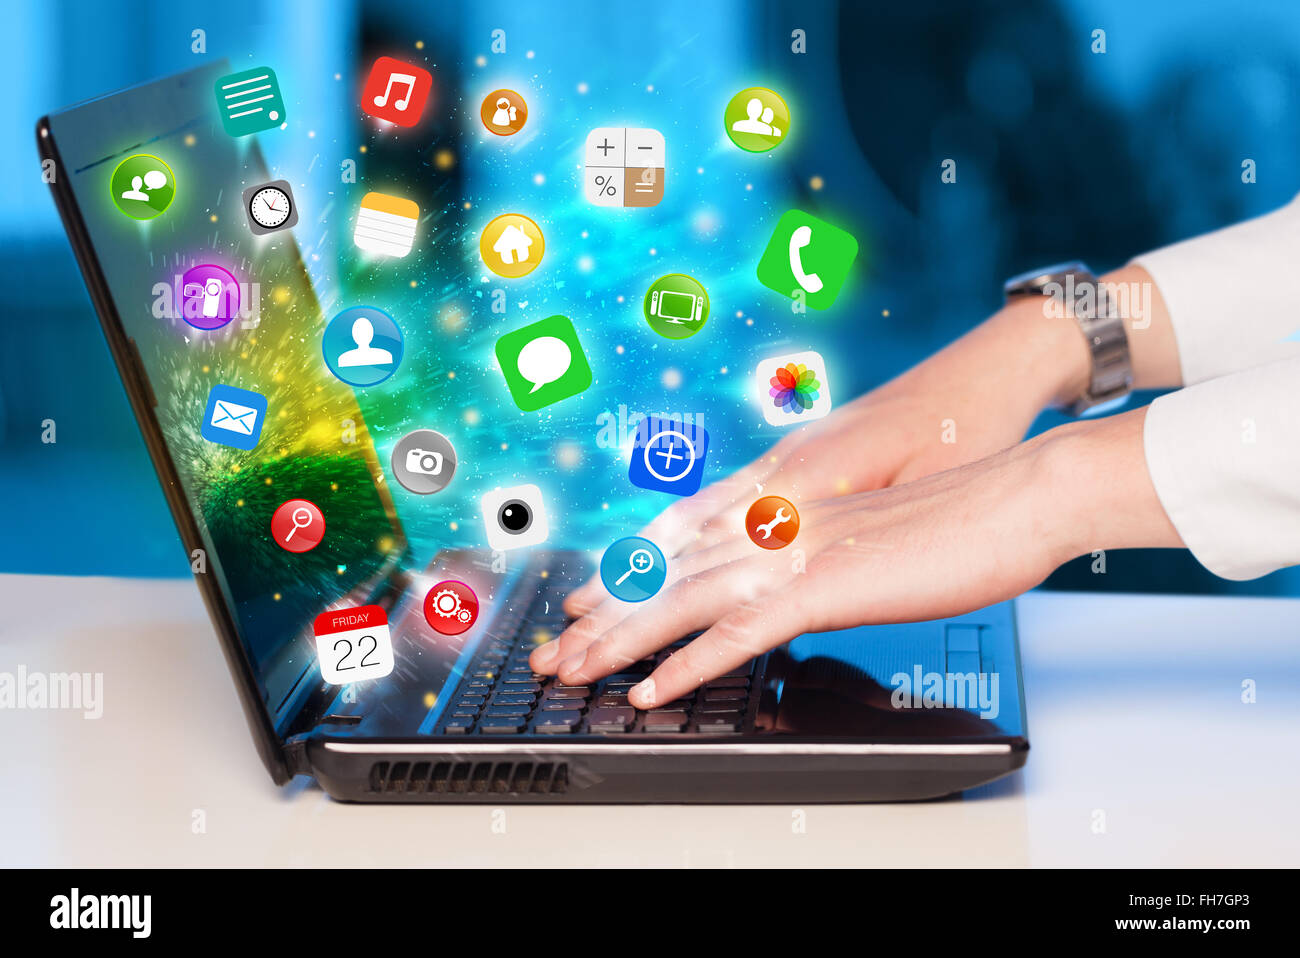 Hand pressing modern laptop with mobile app icons and symbols Stock Photo